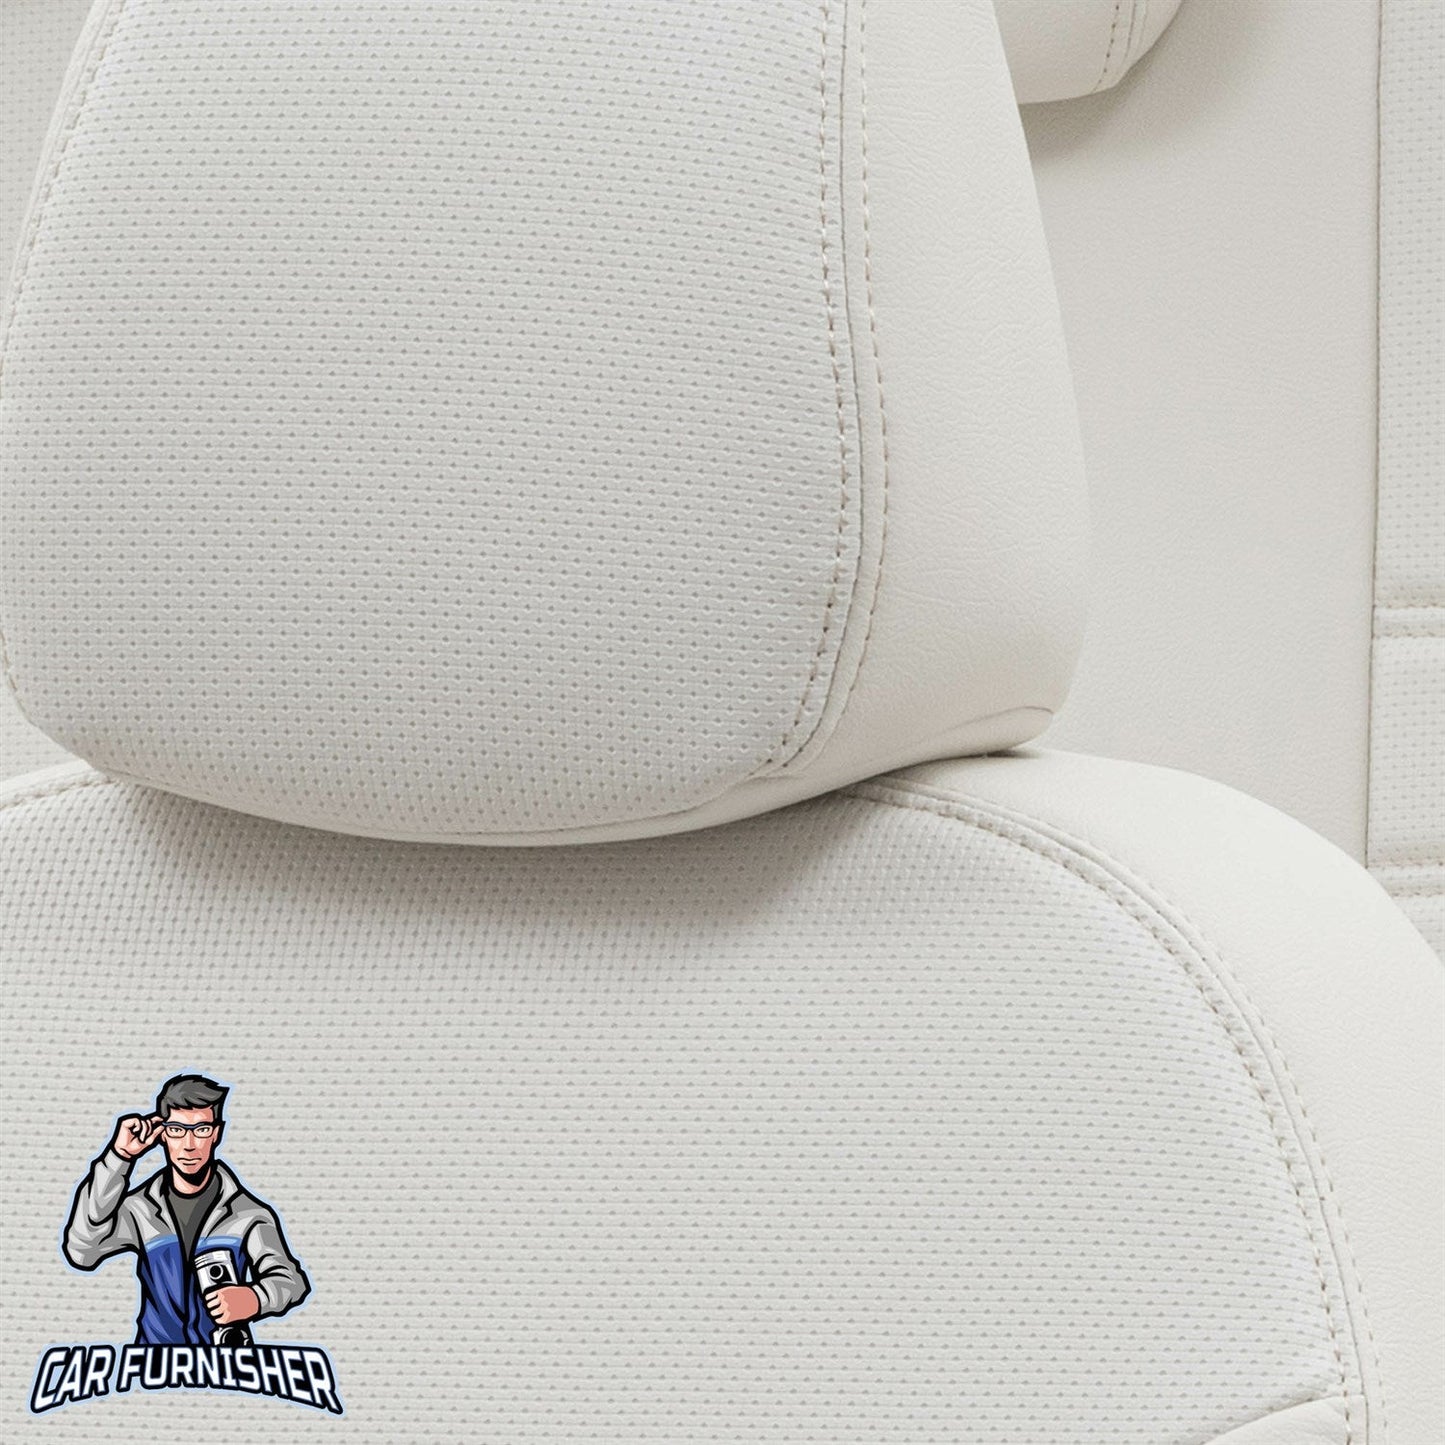 Mercedes Actros Seat Covers New York Leather Design Ivory Leather